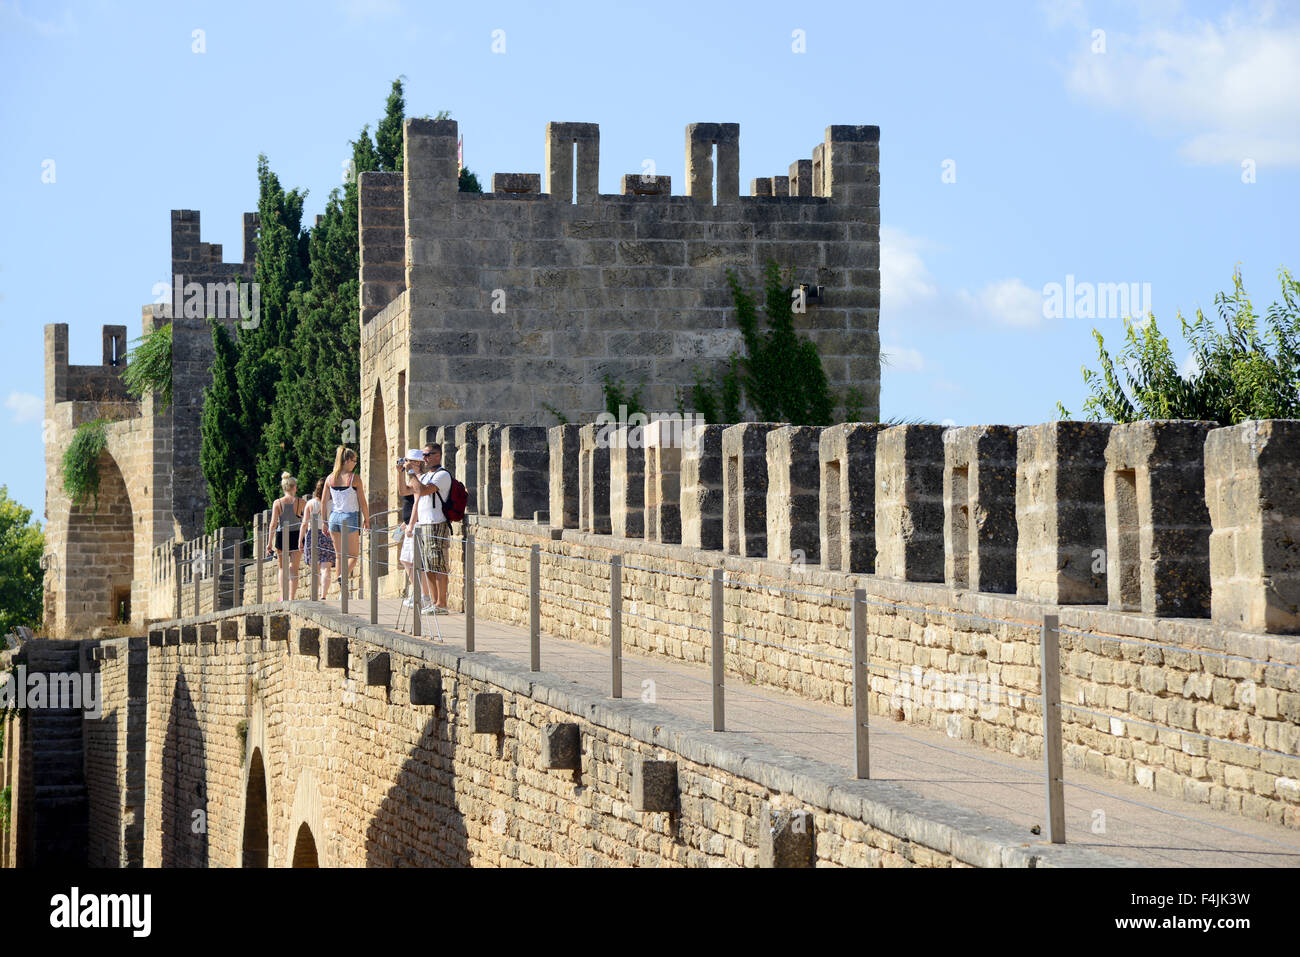 Tourists on the battlements of the ancient city wall, Alcudia Old Town, Balearic Islands, Majorca, Mallorca, Spain Stock Photo